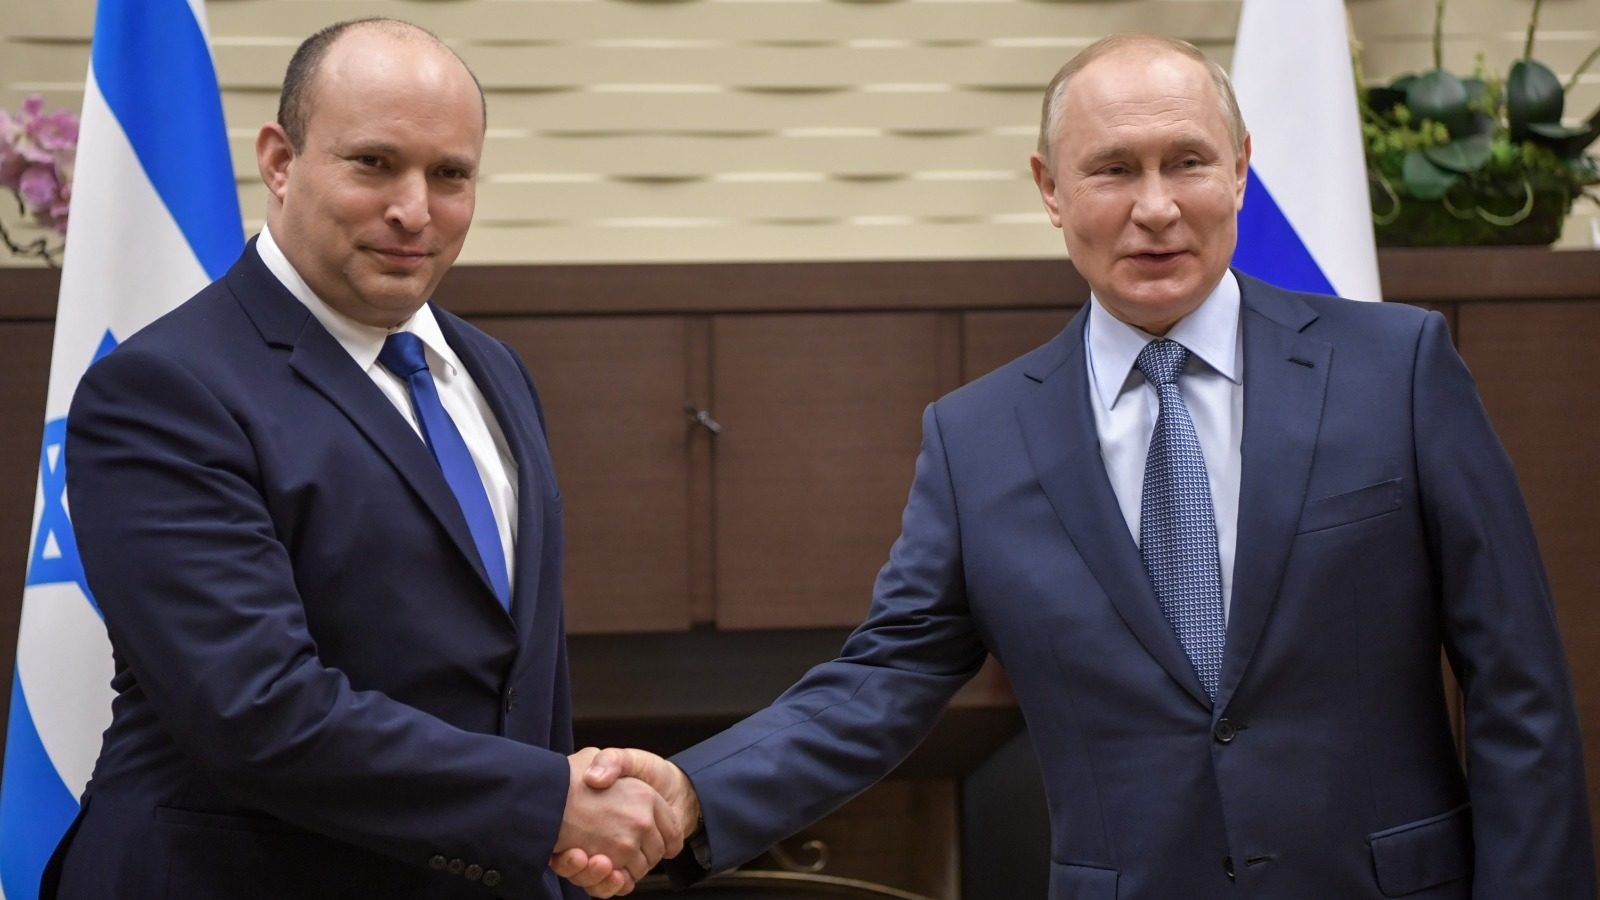 Bennett to Cabinet After Meeting Putin: Russian President ‘Attentive to Israel’s Security Needs’